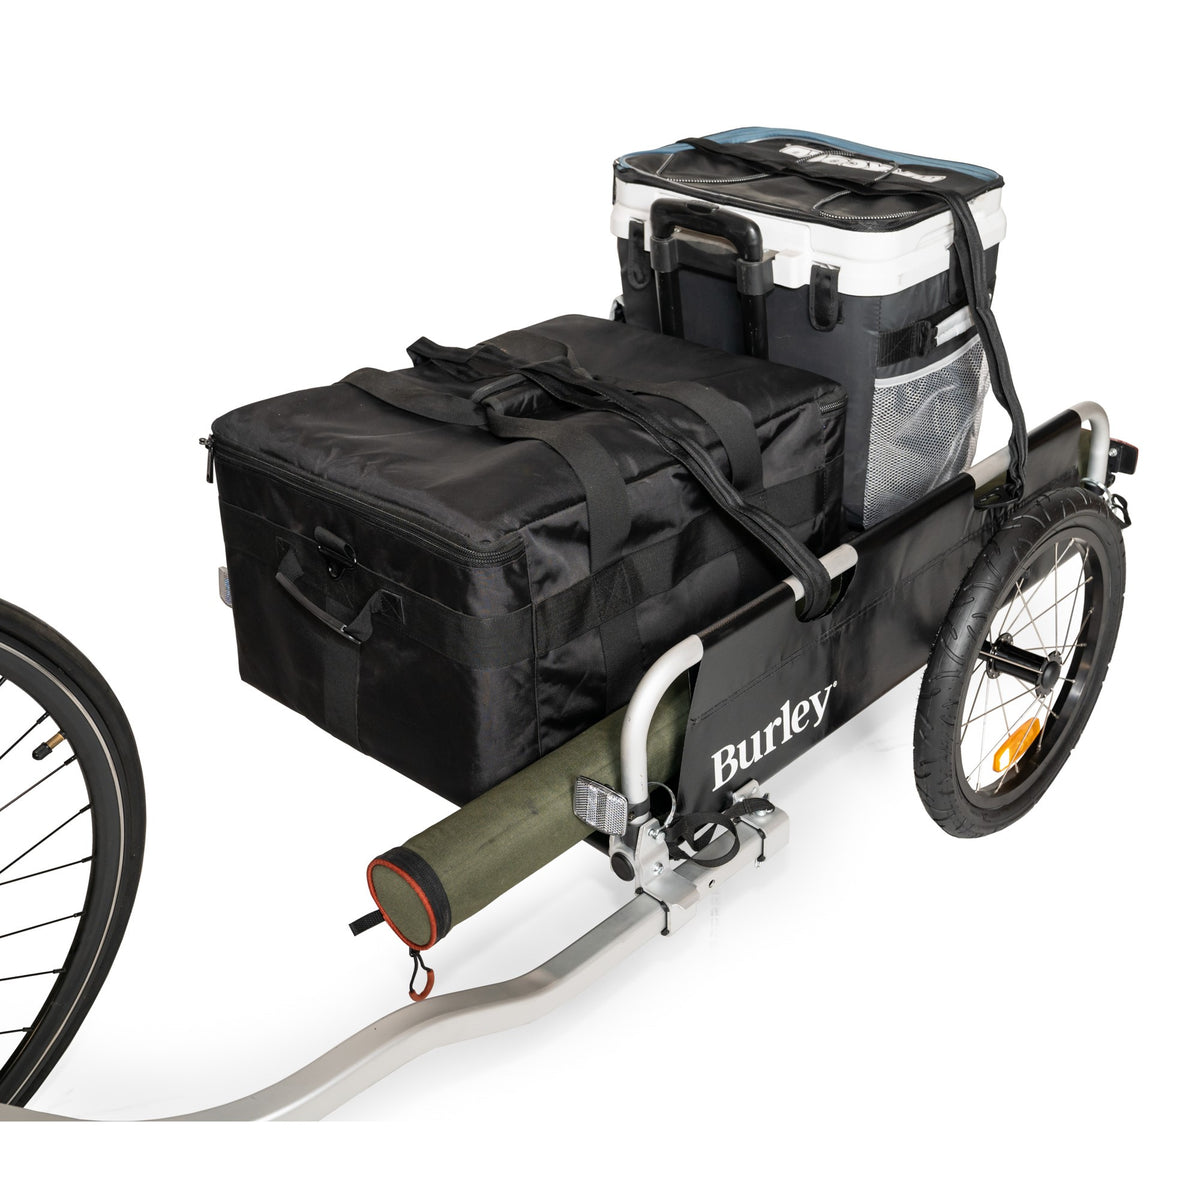 Burley Flatbed Bike Trailer Loaded With Outdoor Gear